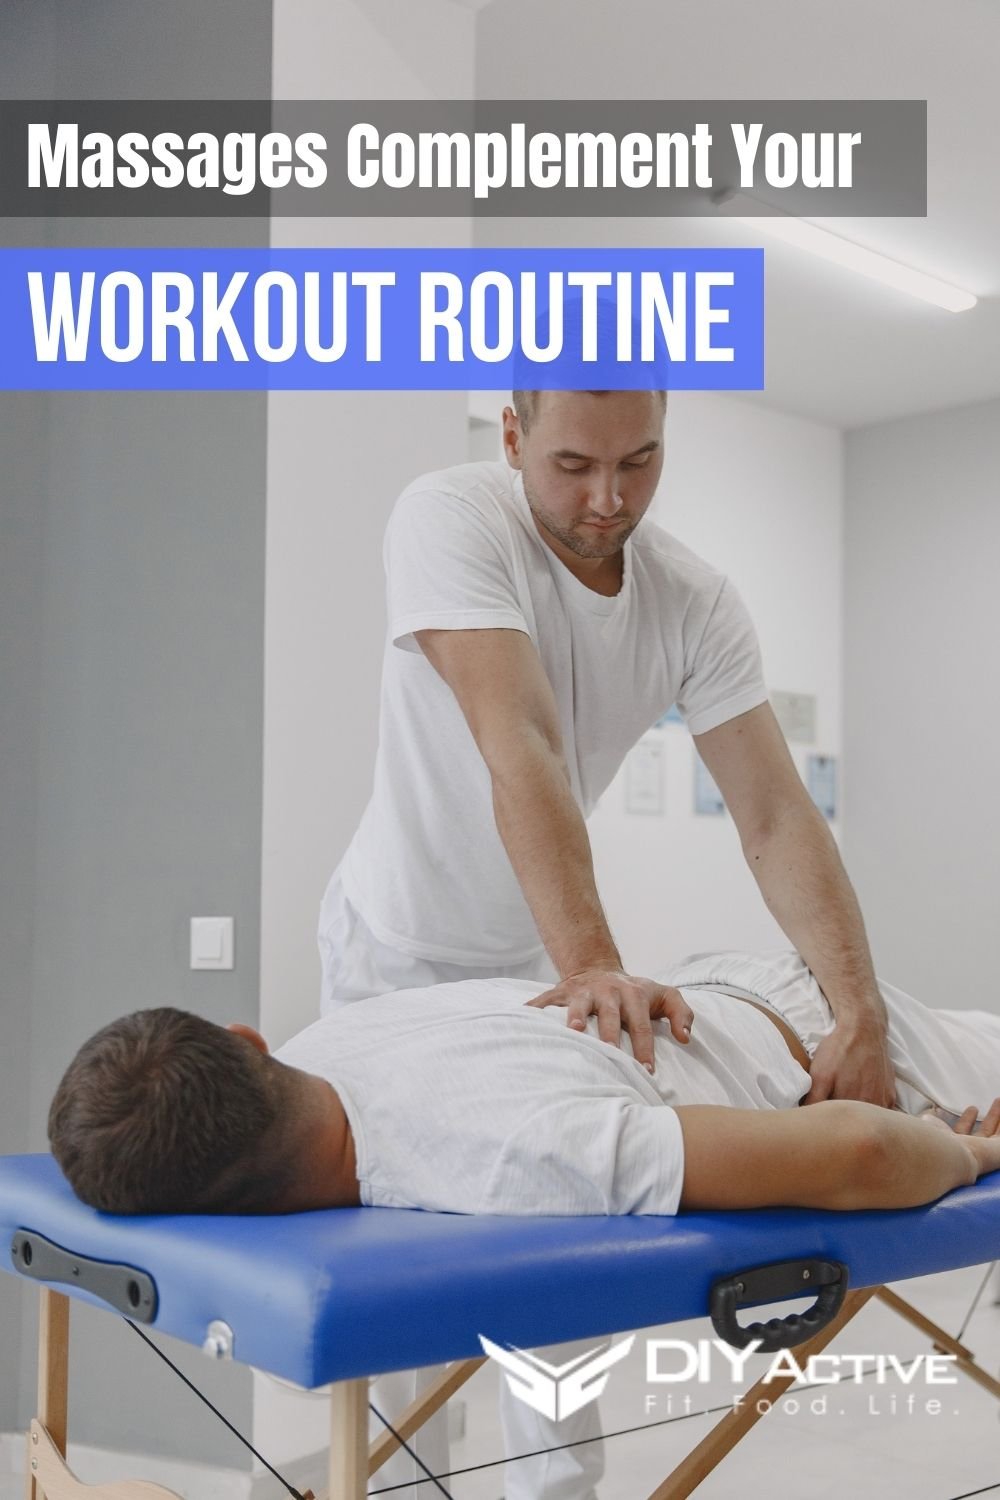 7 Ways Massages Complement Your Workout Routine